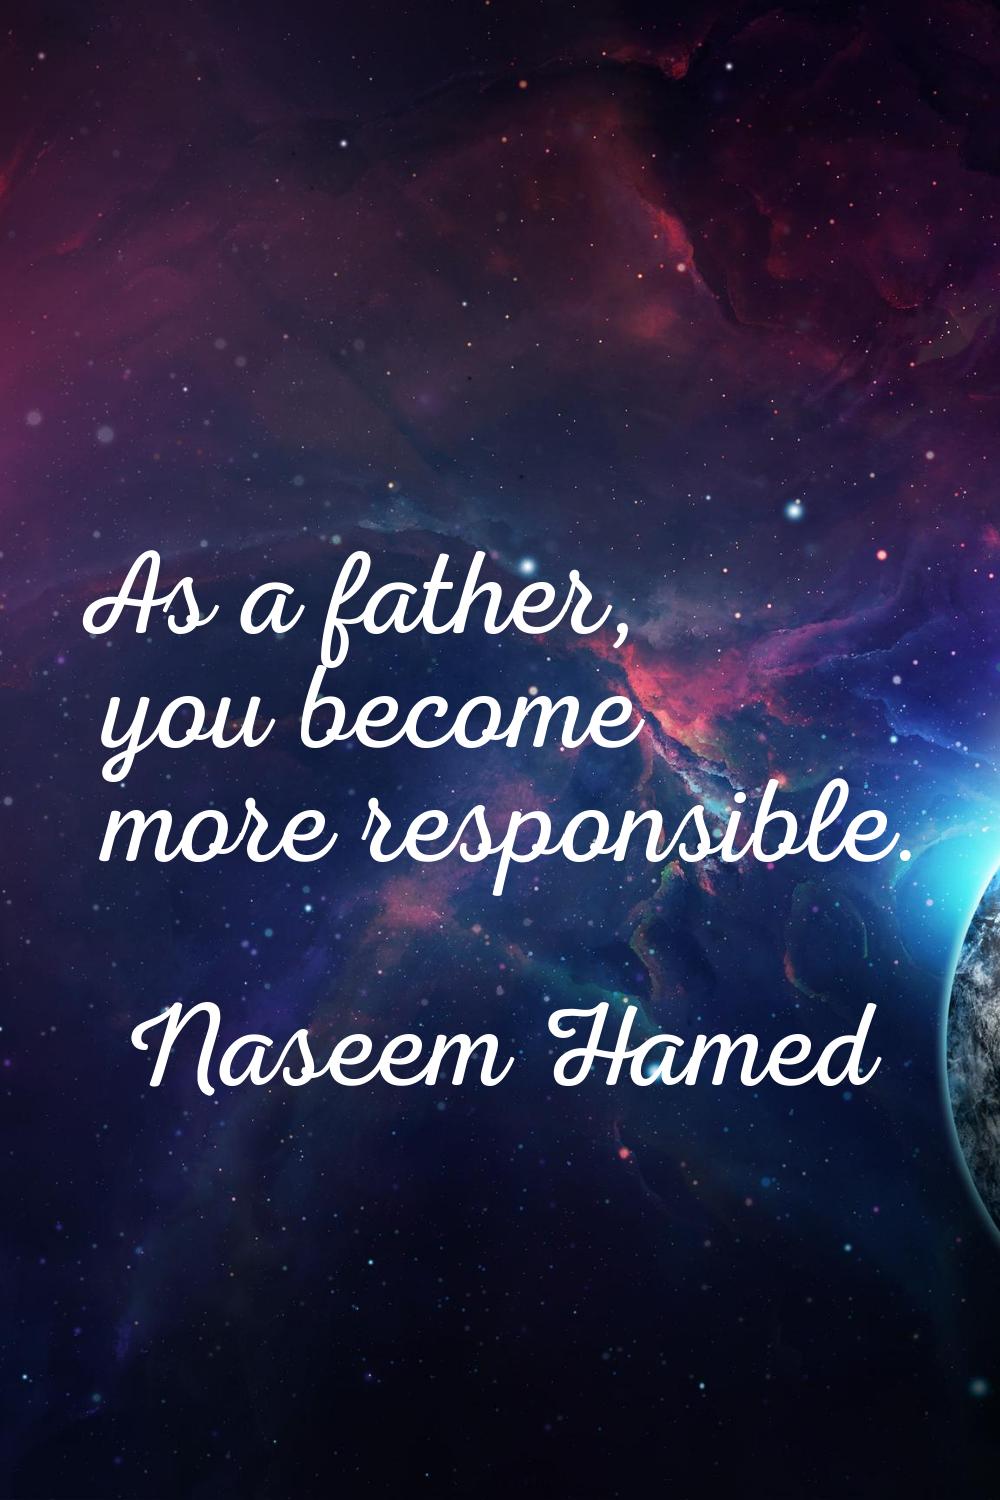 As a father, you become more responsible.